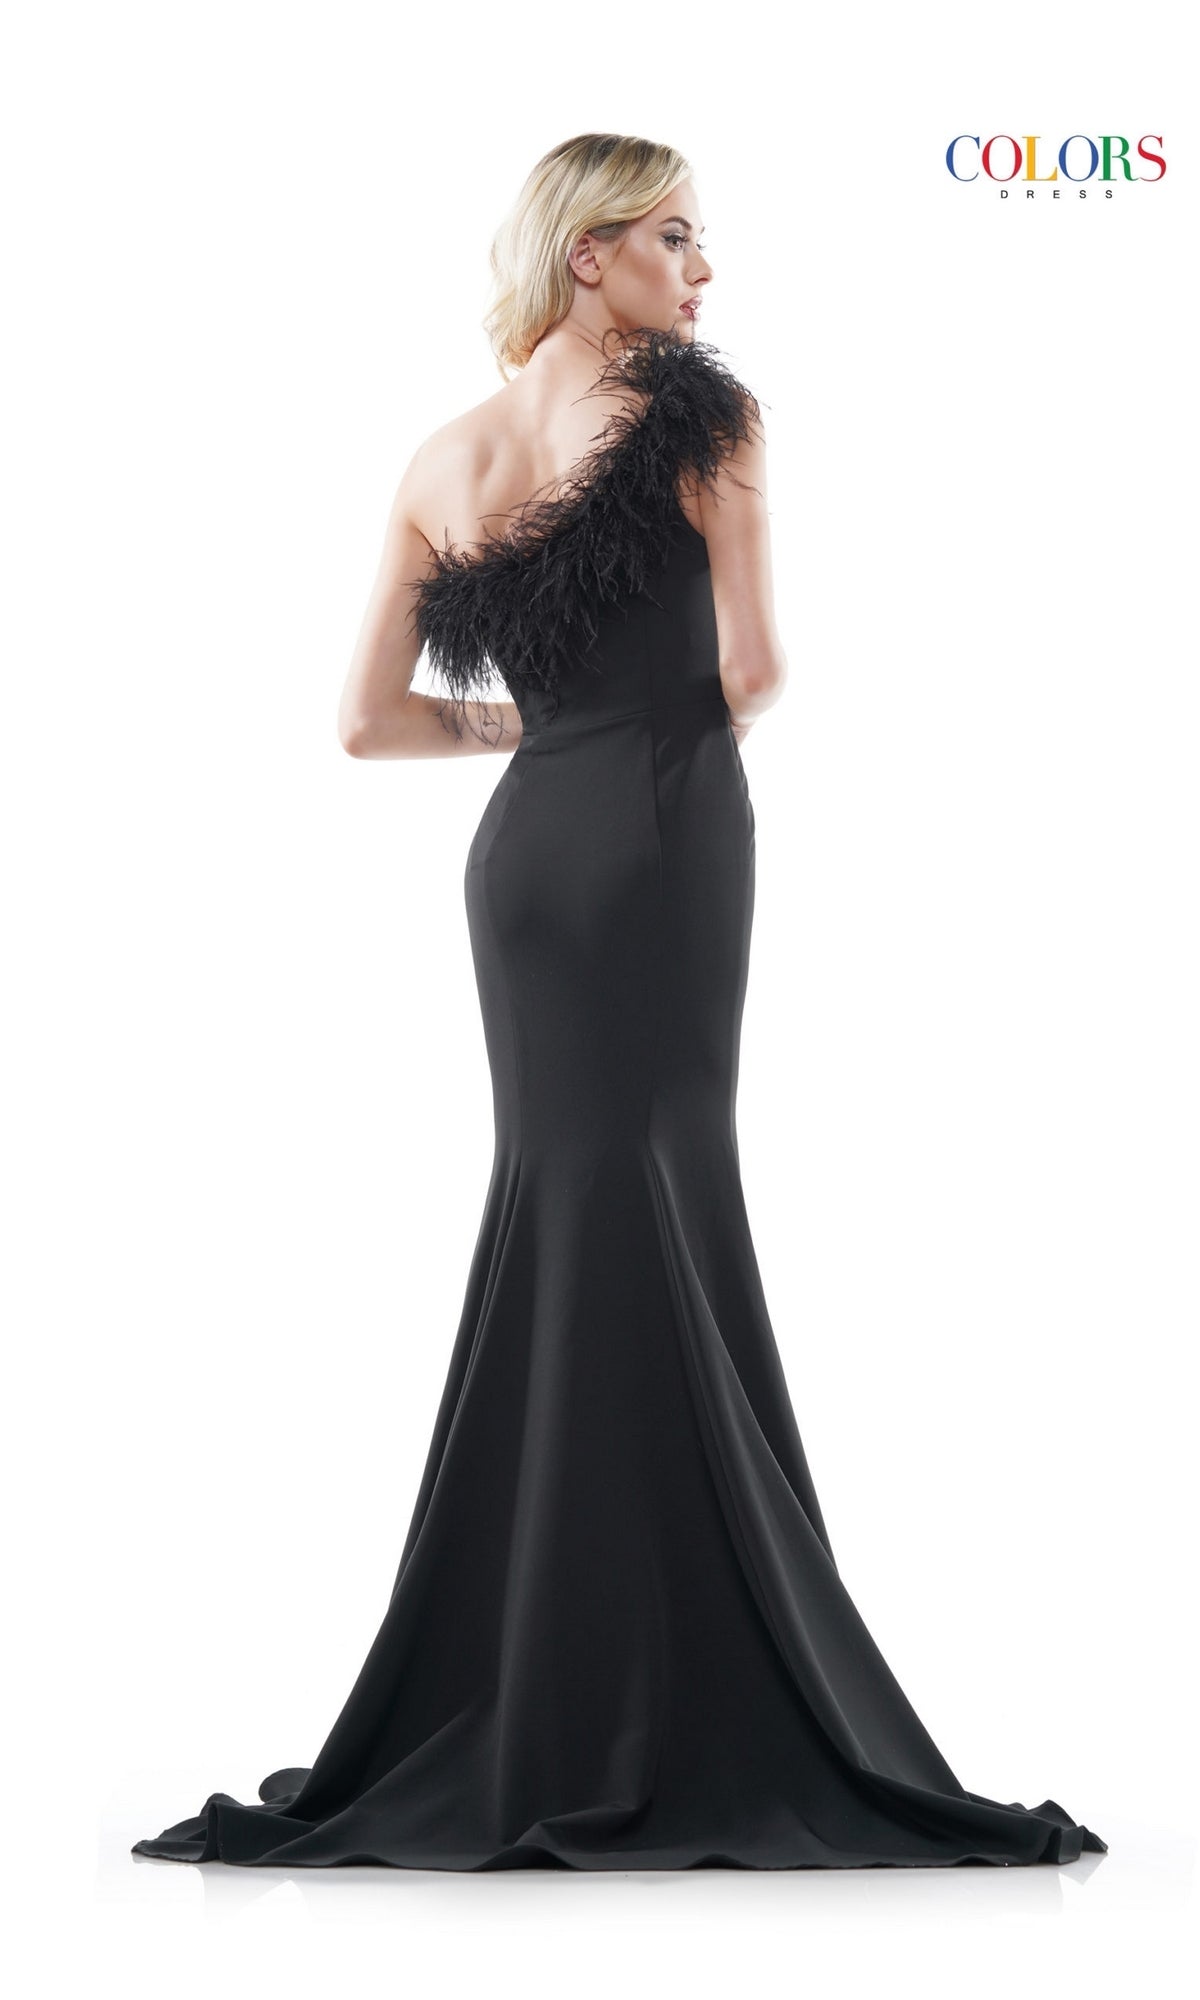 Feather-Trimmed One-Shoulder Long Prom Dress 2405